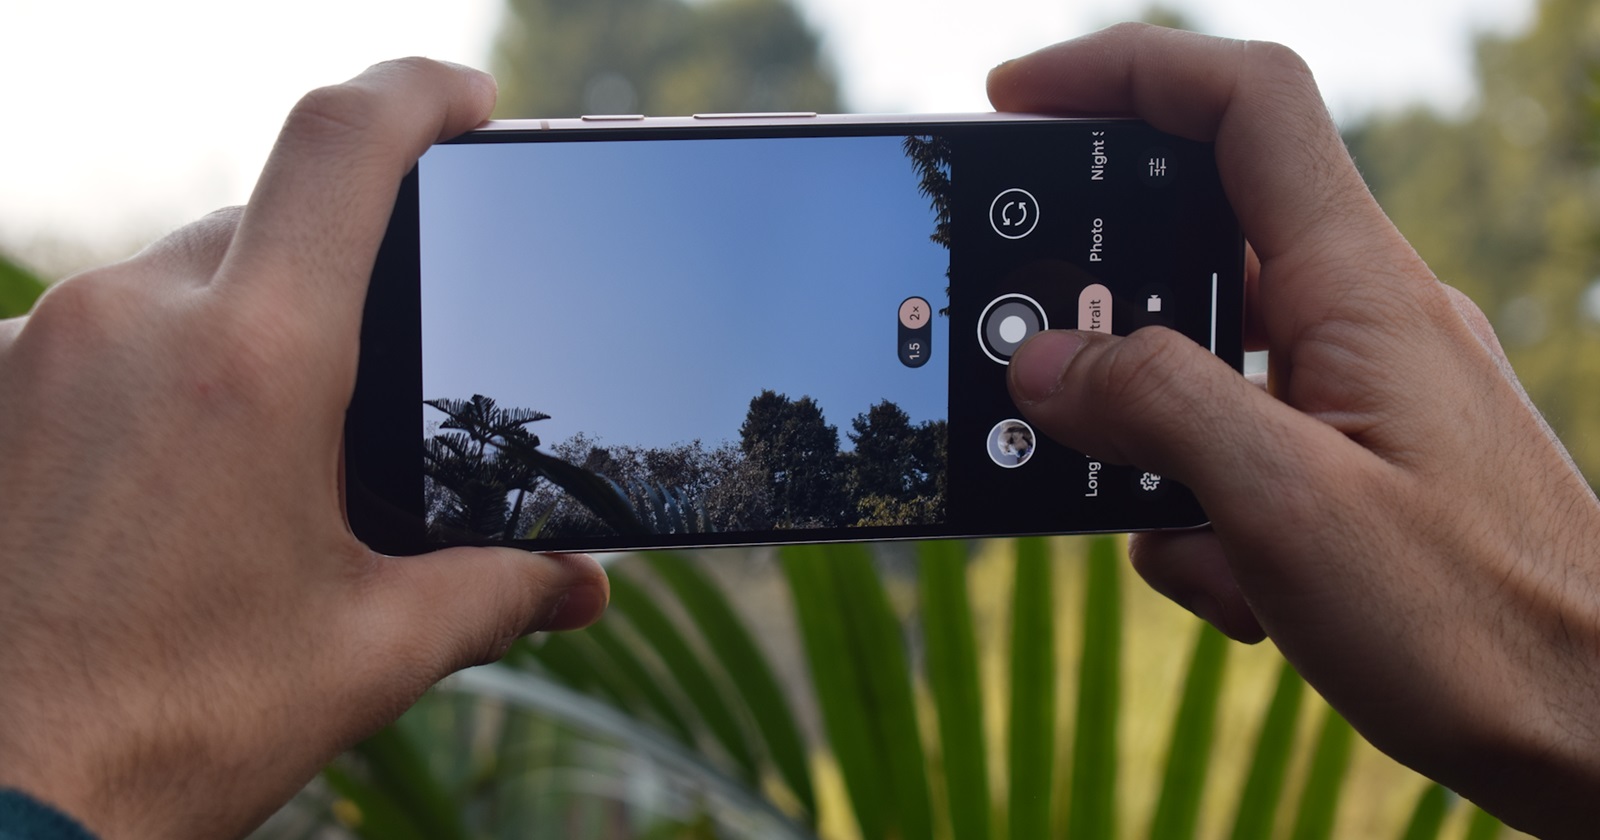 Google fixed Pixel 8 image re-exposure issue after tapping on viewfinder, no luck for Pixel 7 users